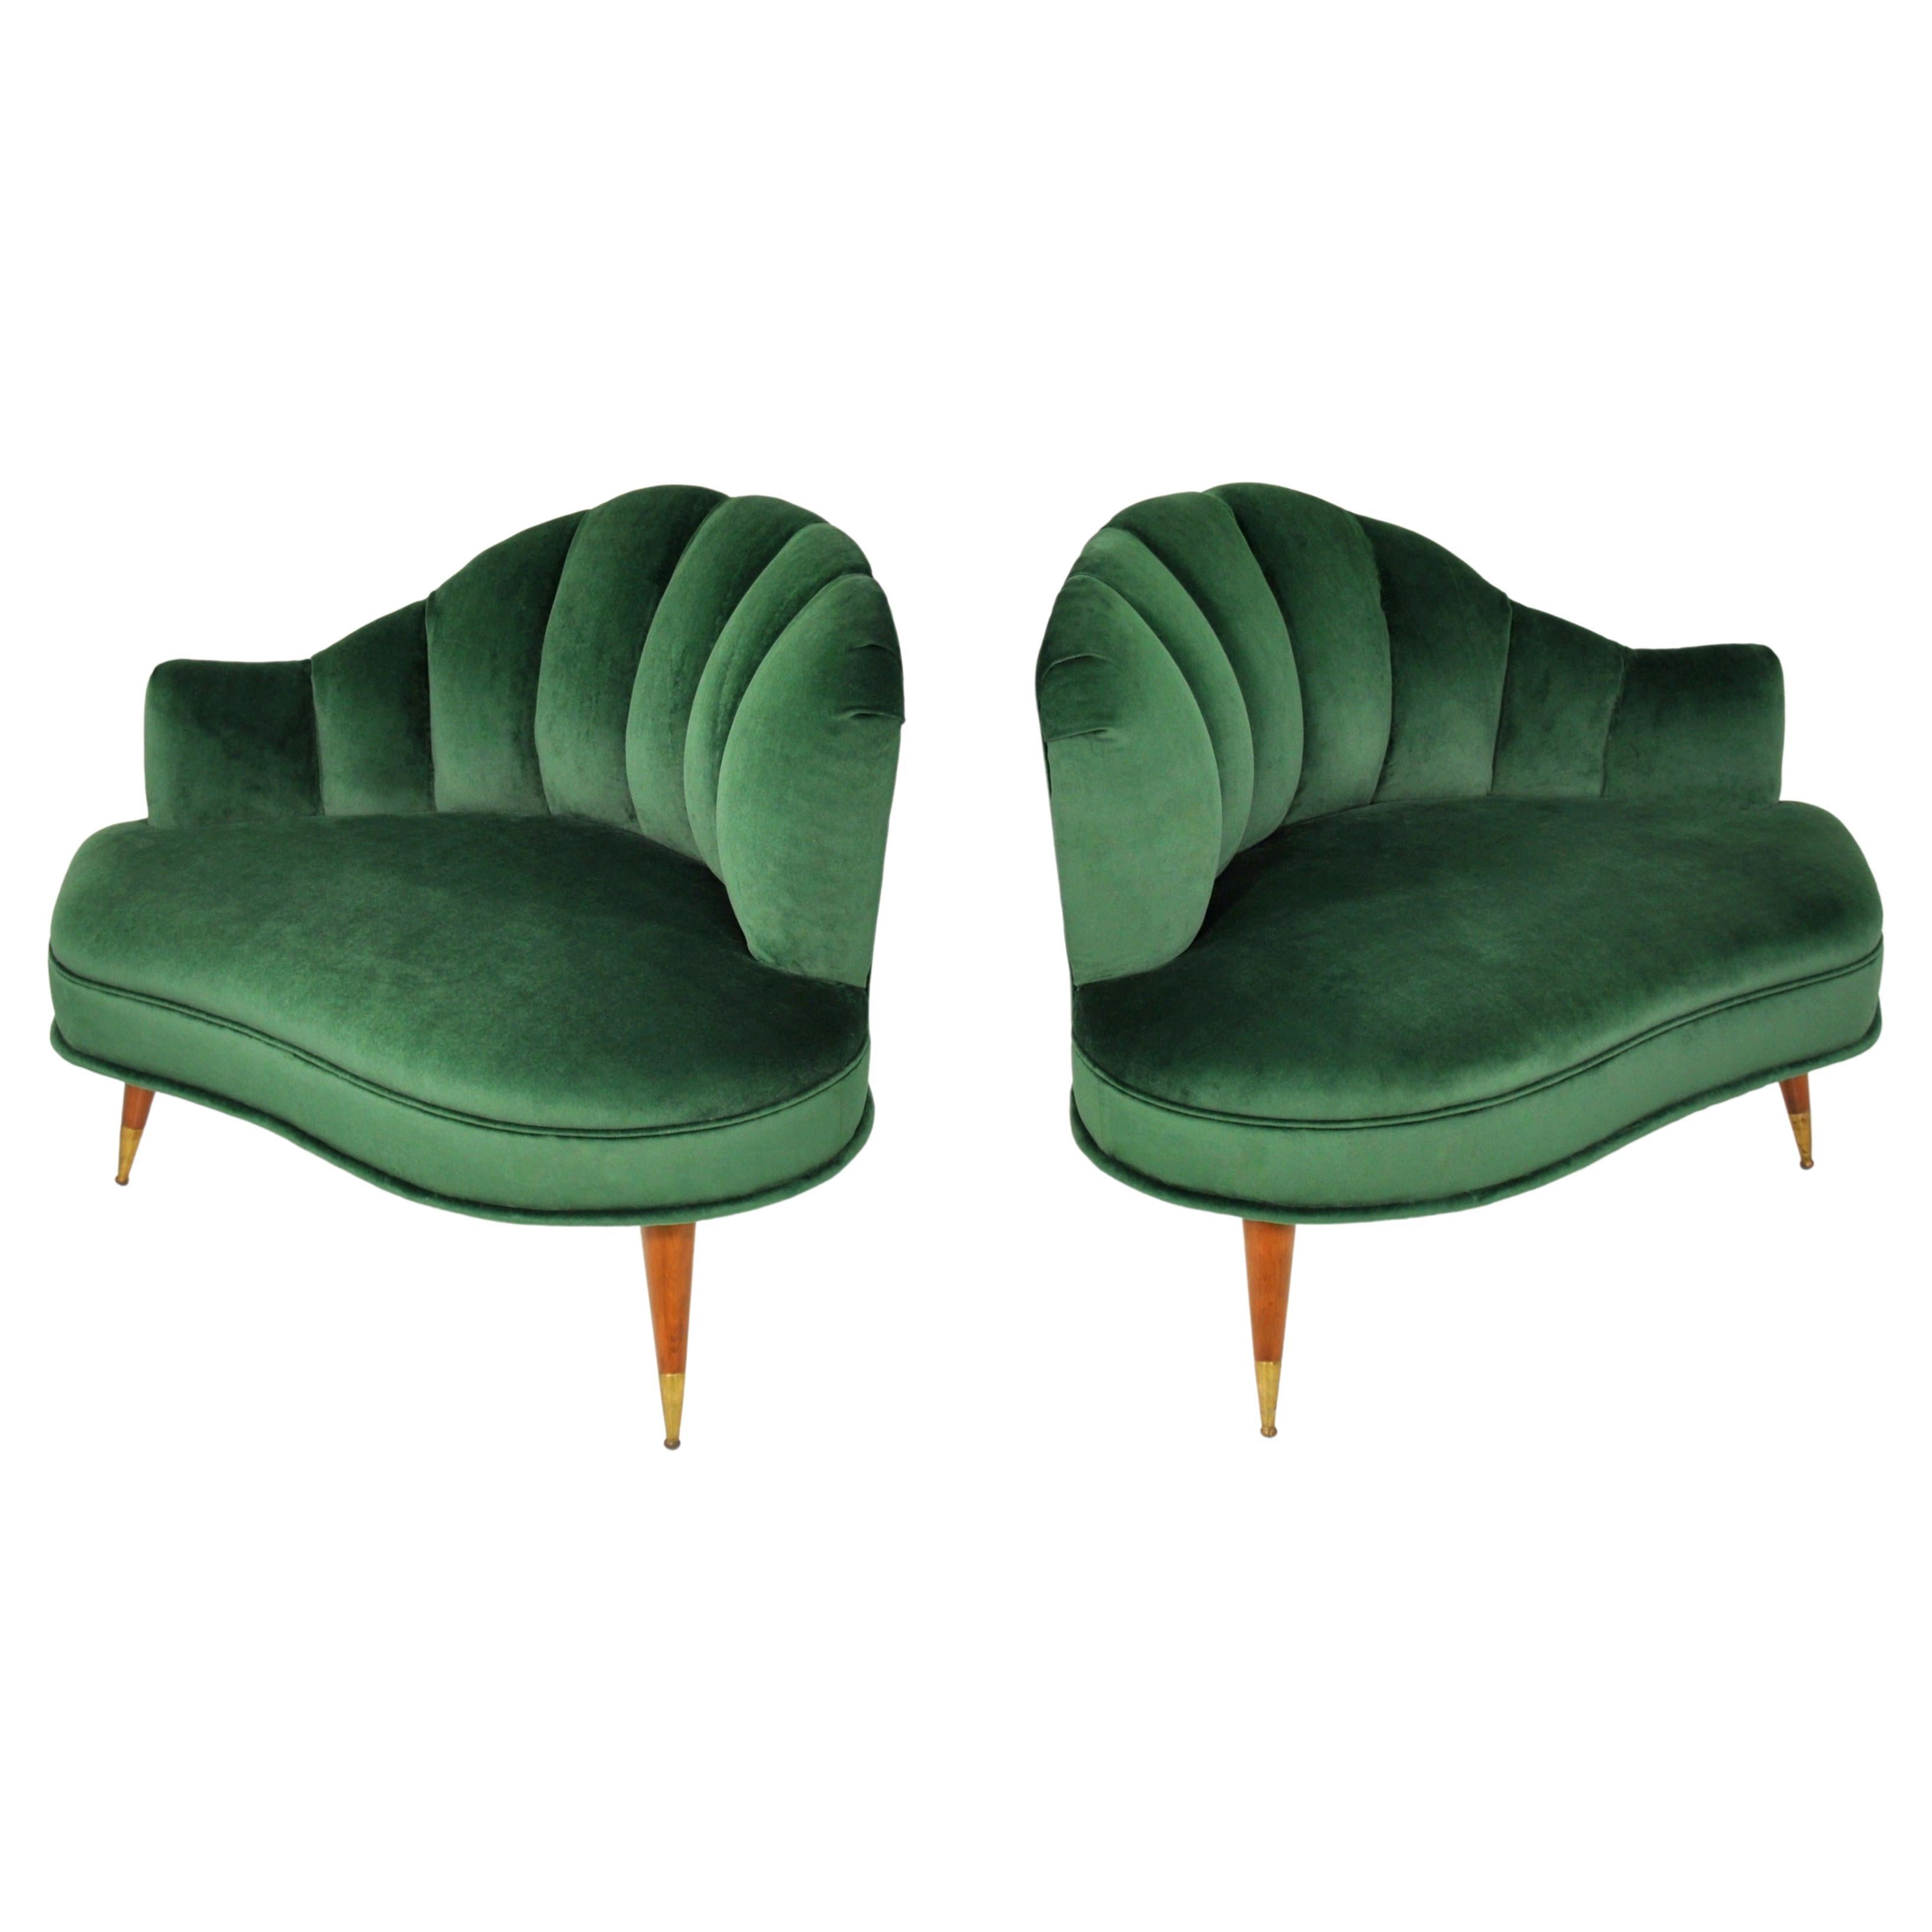 Hollywood Regency Mid-Century Modern Channel Back Lounge Chairs - Pair